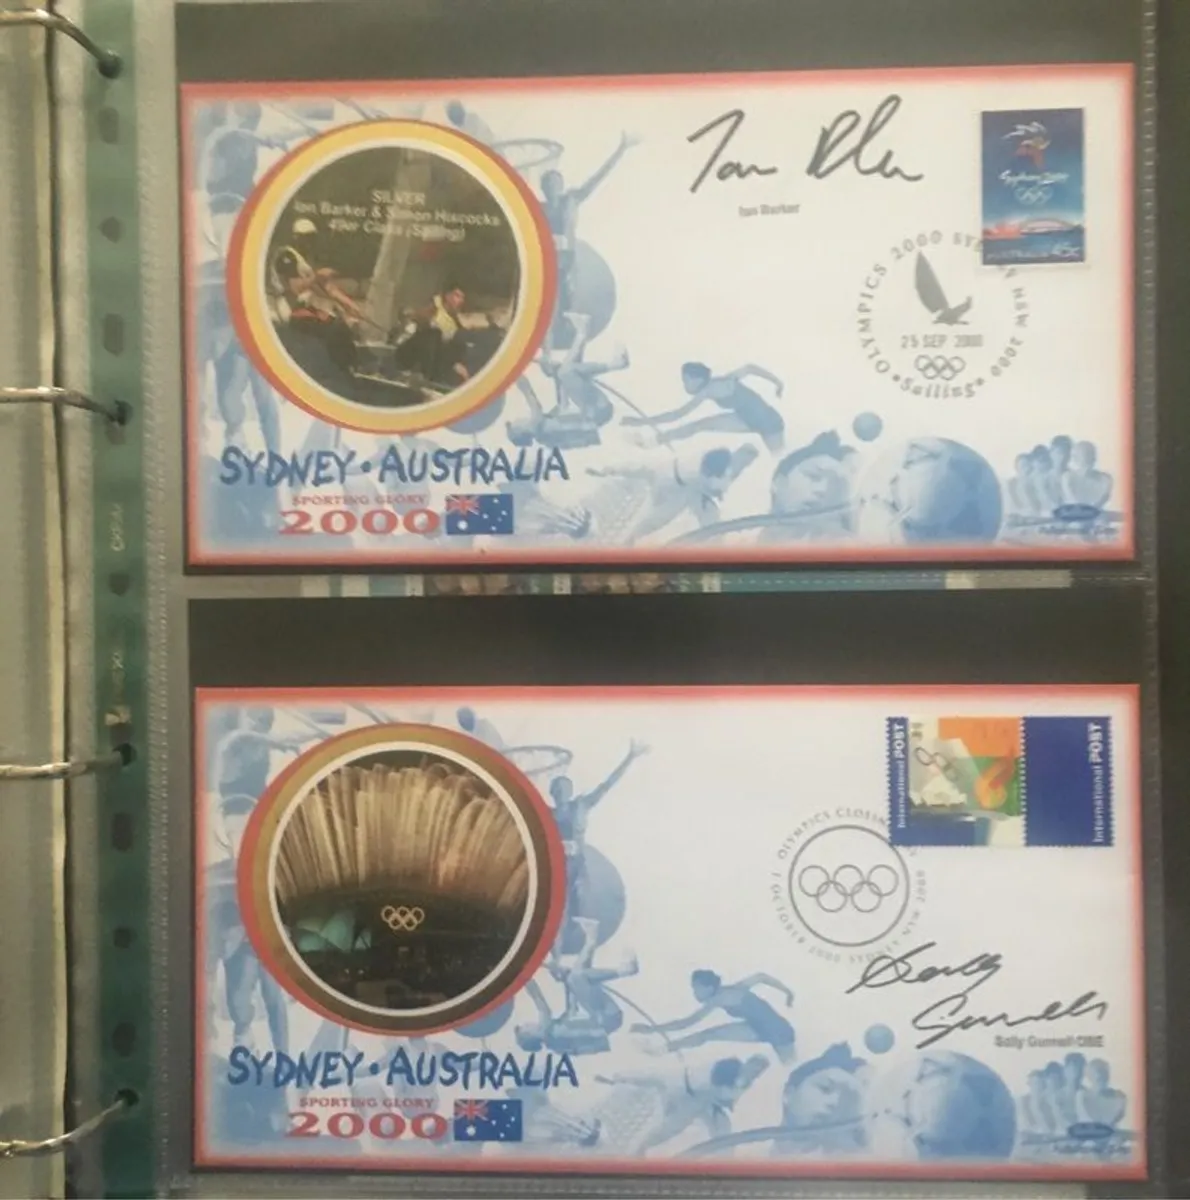 Australia Sydney 2000 Olympic Games Medal Winners Stamp Collection by Benham. Includes 16 sheets & 23 Covers. (31 images) - Image 1